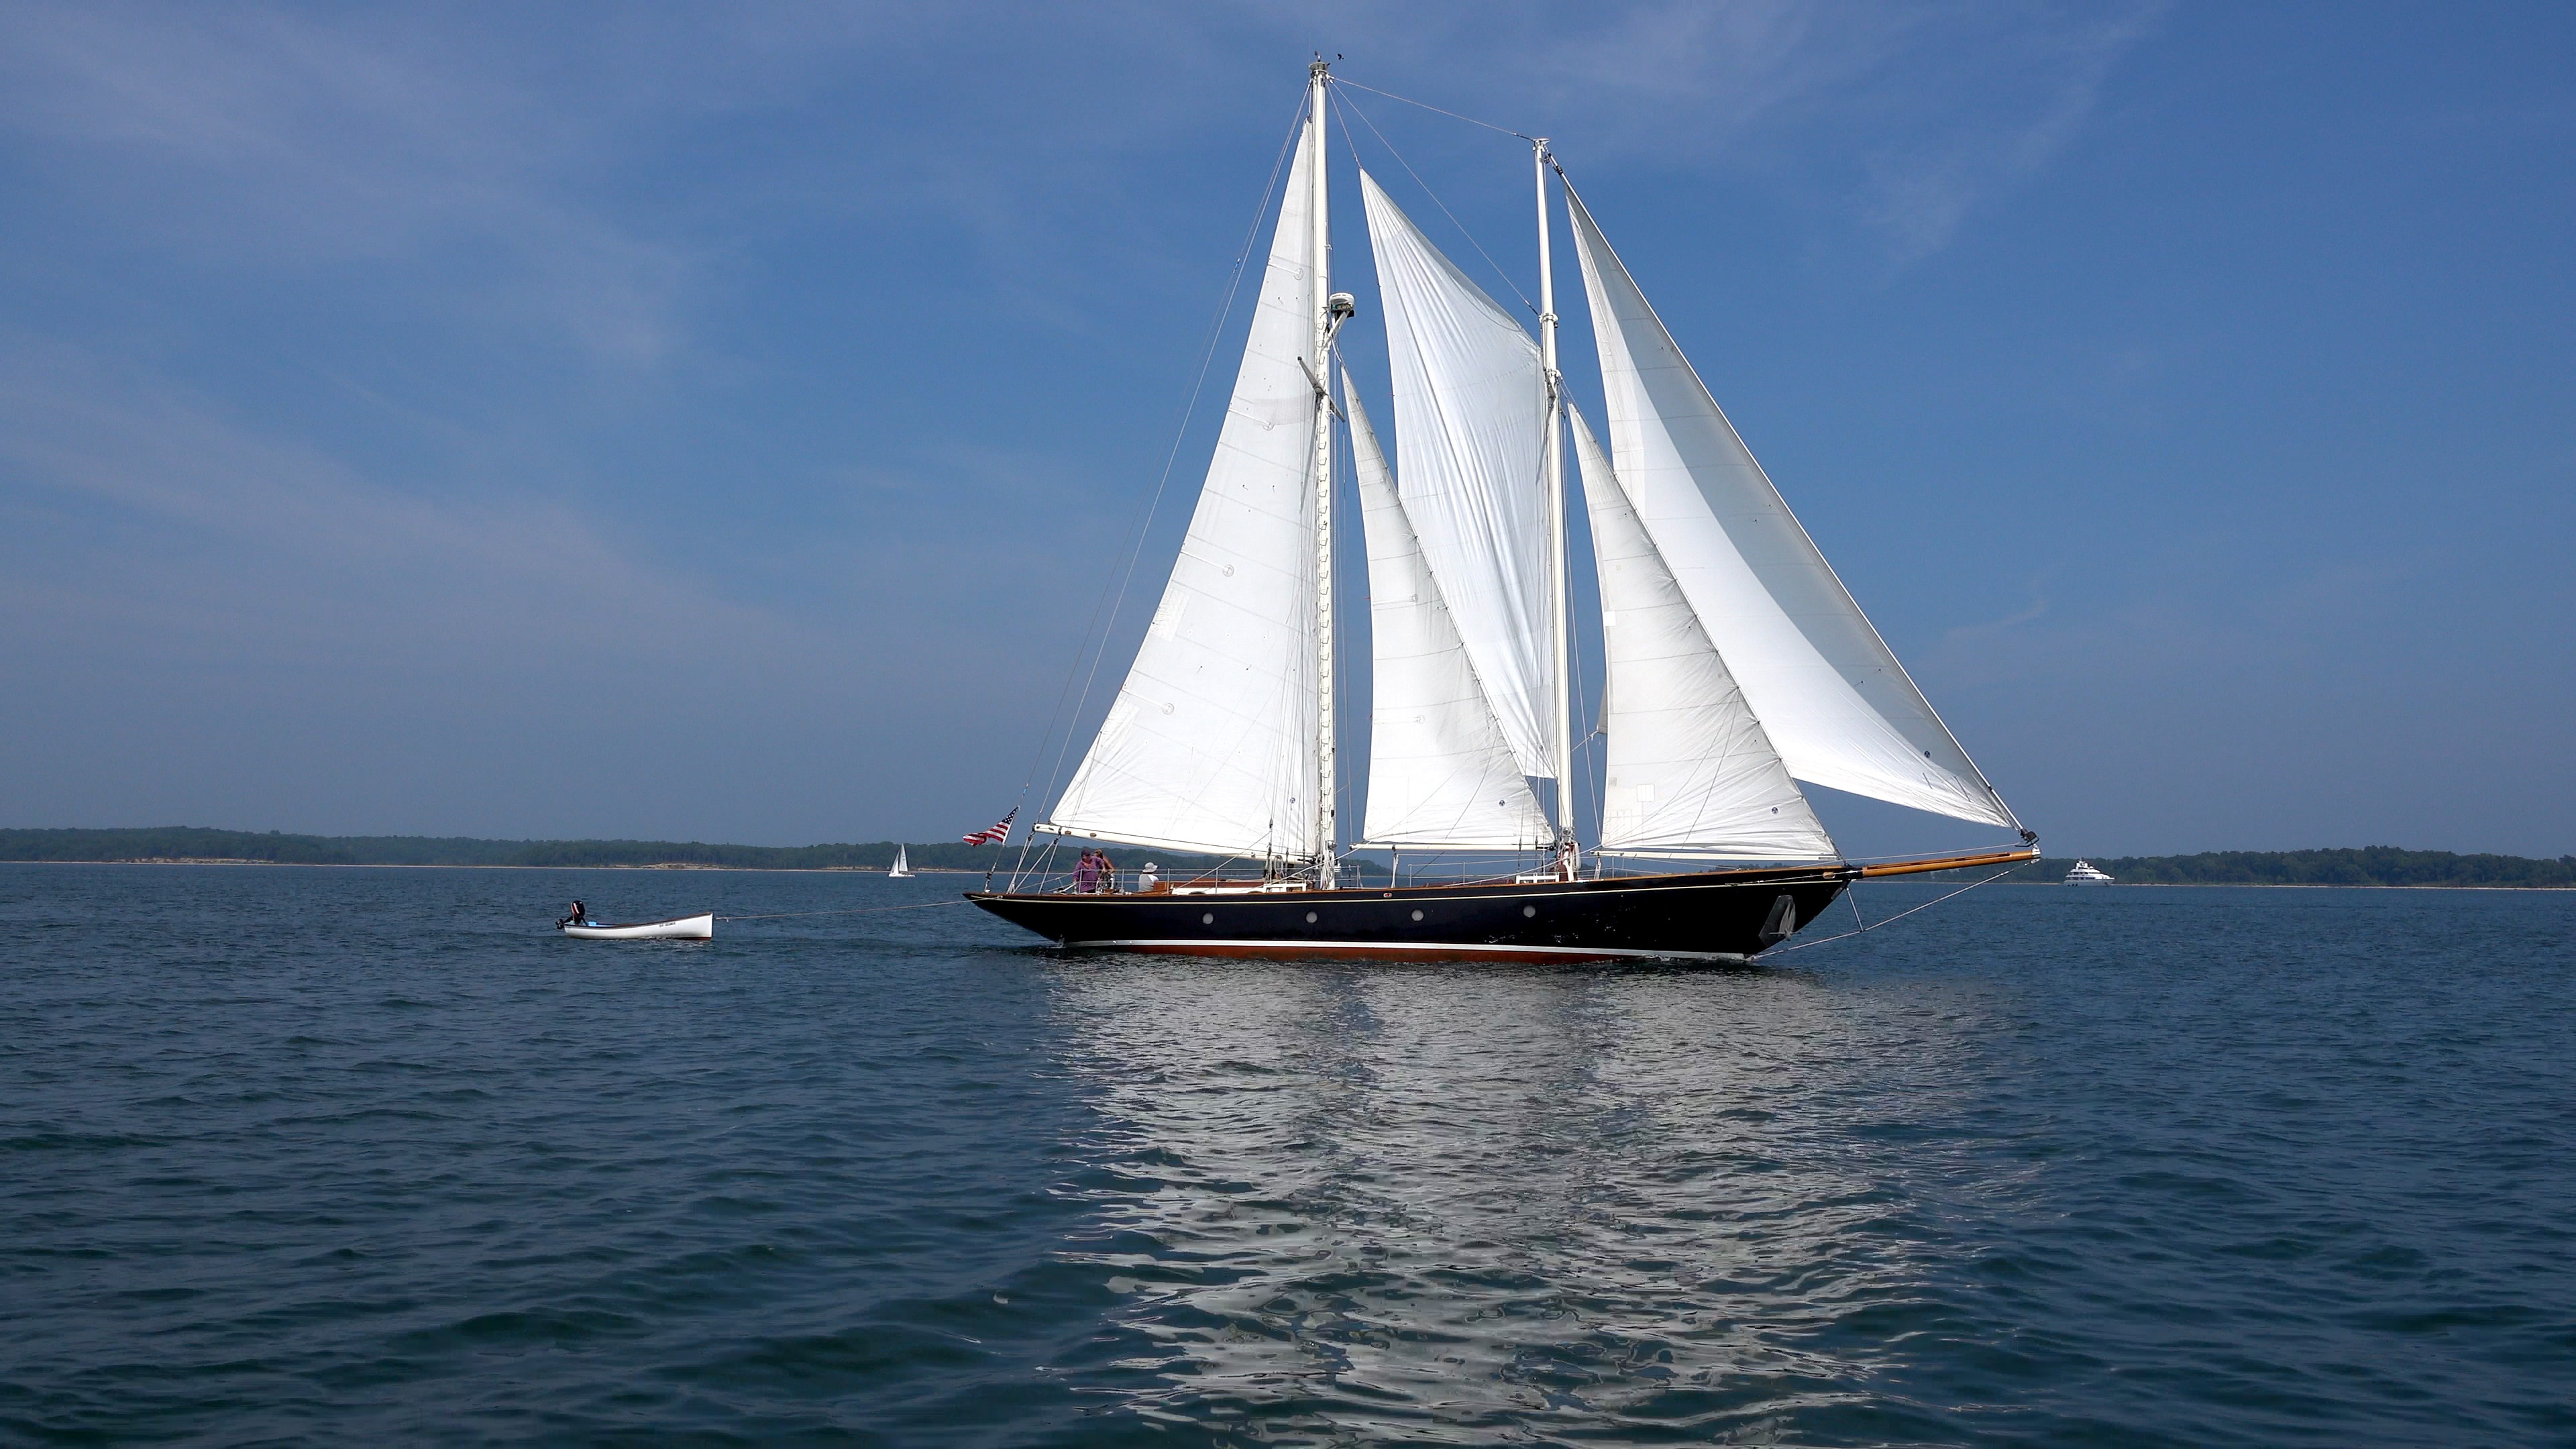 Sail Boat: A vessel powered by sails using the force of the wind, Lelanta, Sag Harbor, NY. 3840x2160 4K Wallpaper.